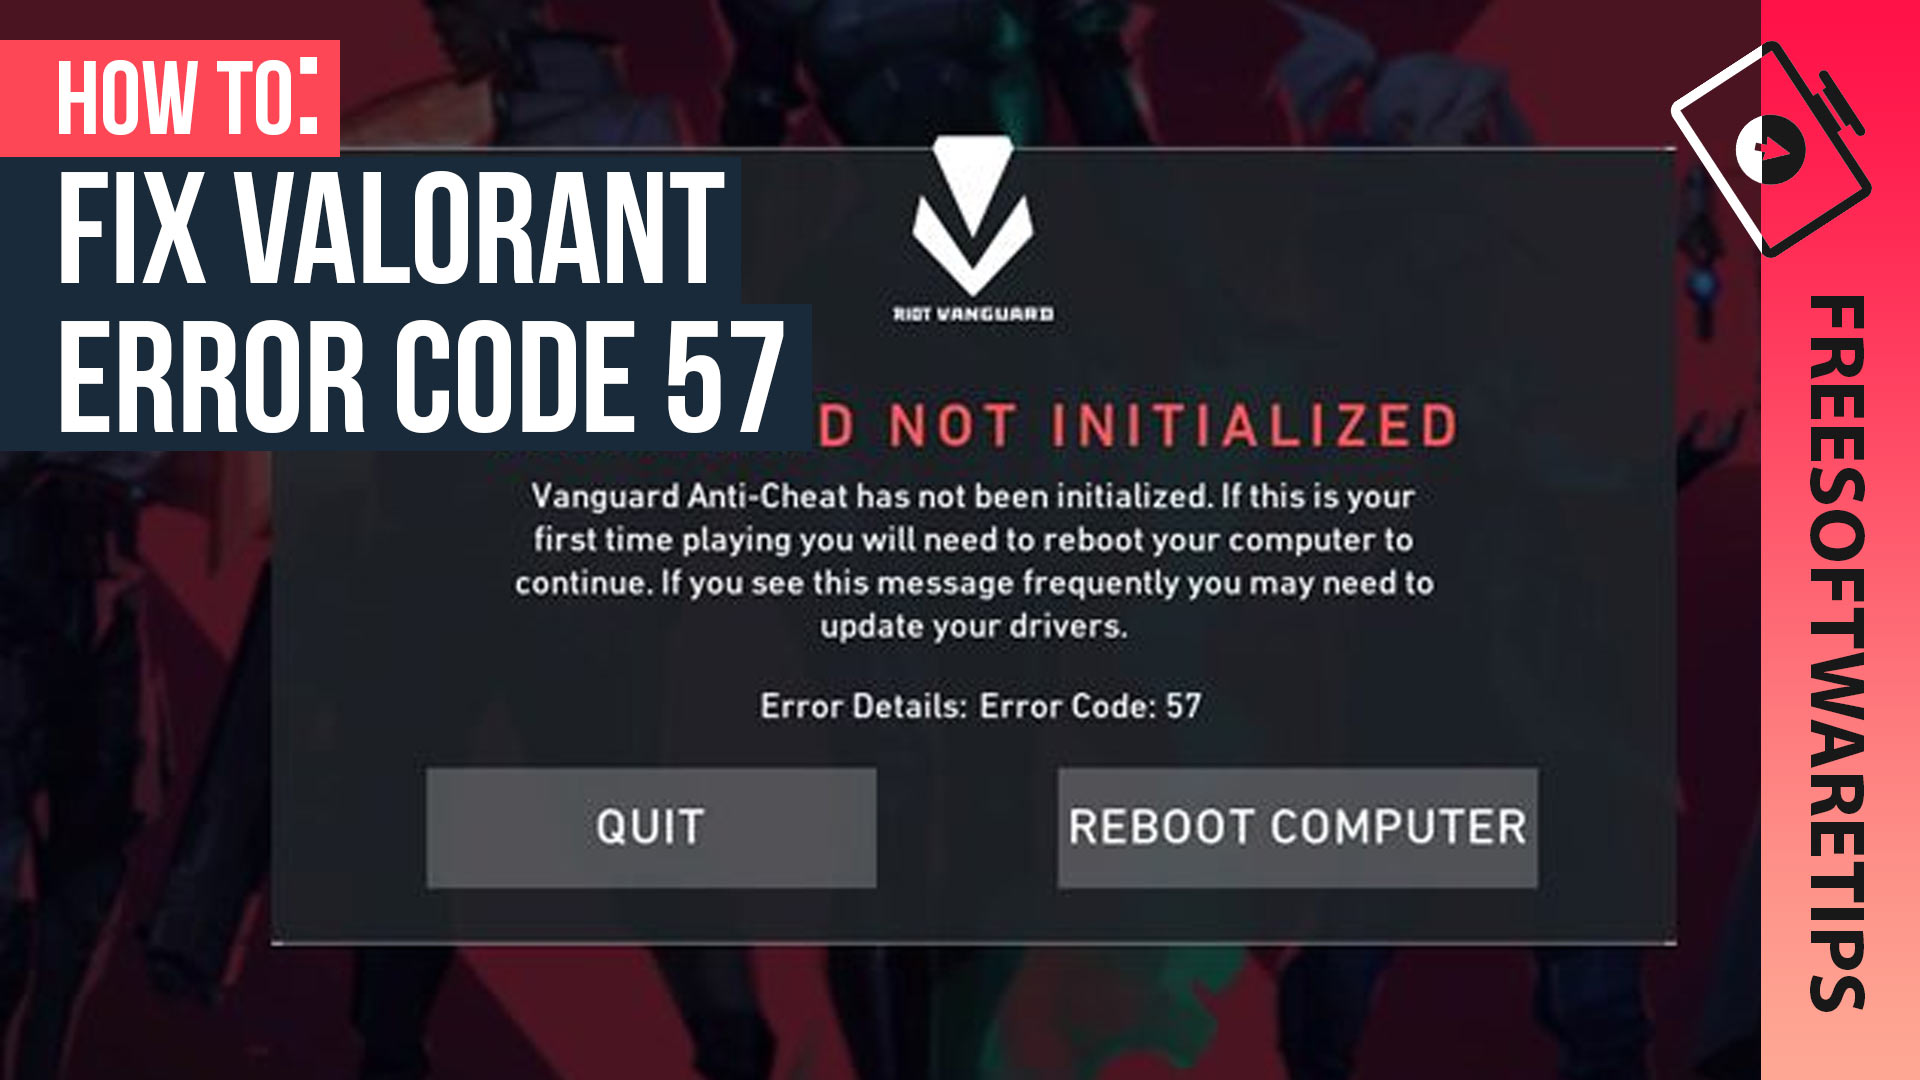 If an update is available, follow the prompts to install it.
Restart your computer and check if the Riot Vanguard error is resolved.